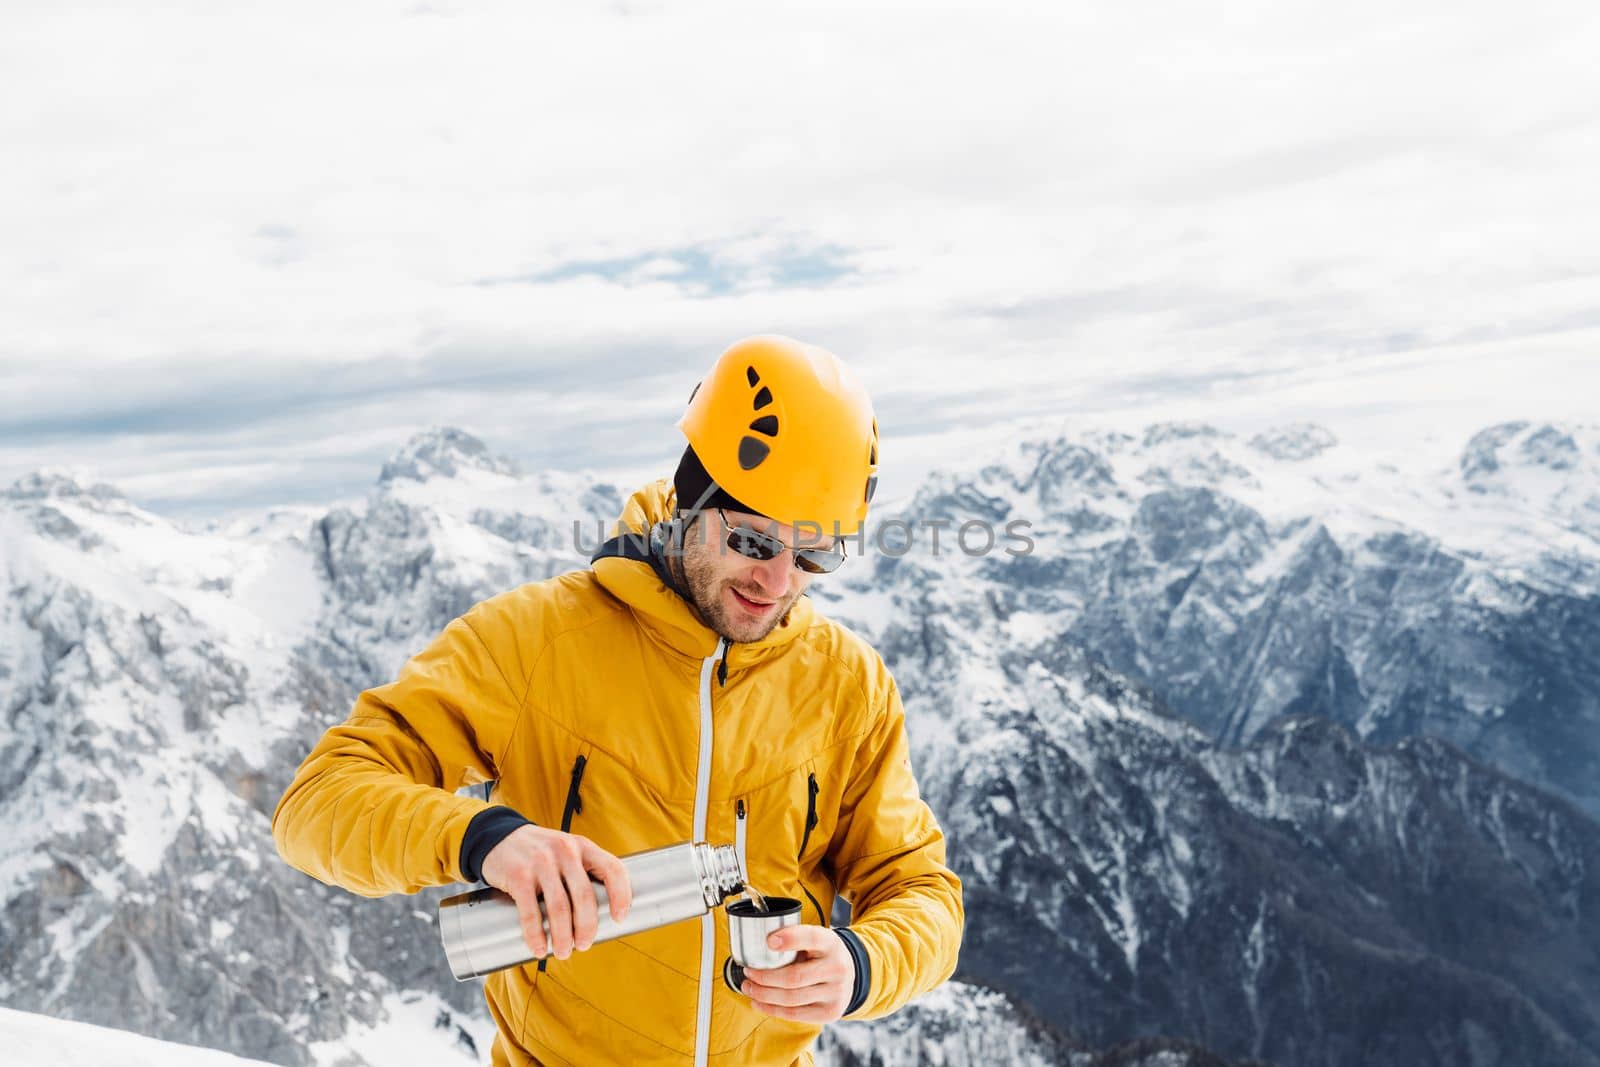 Mountaineer in a yellow jacket and helmet pouring himself some tea, view of snowy Alps in the background by VisualProductions